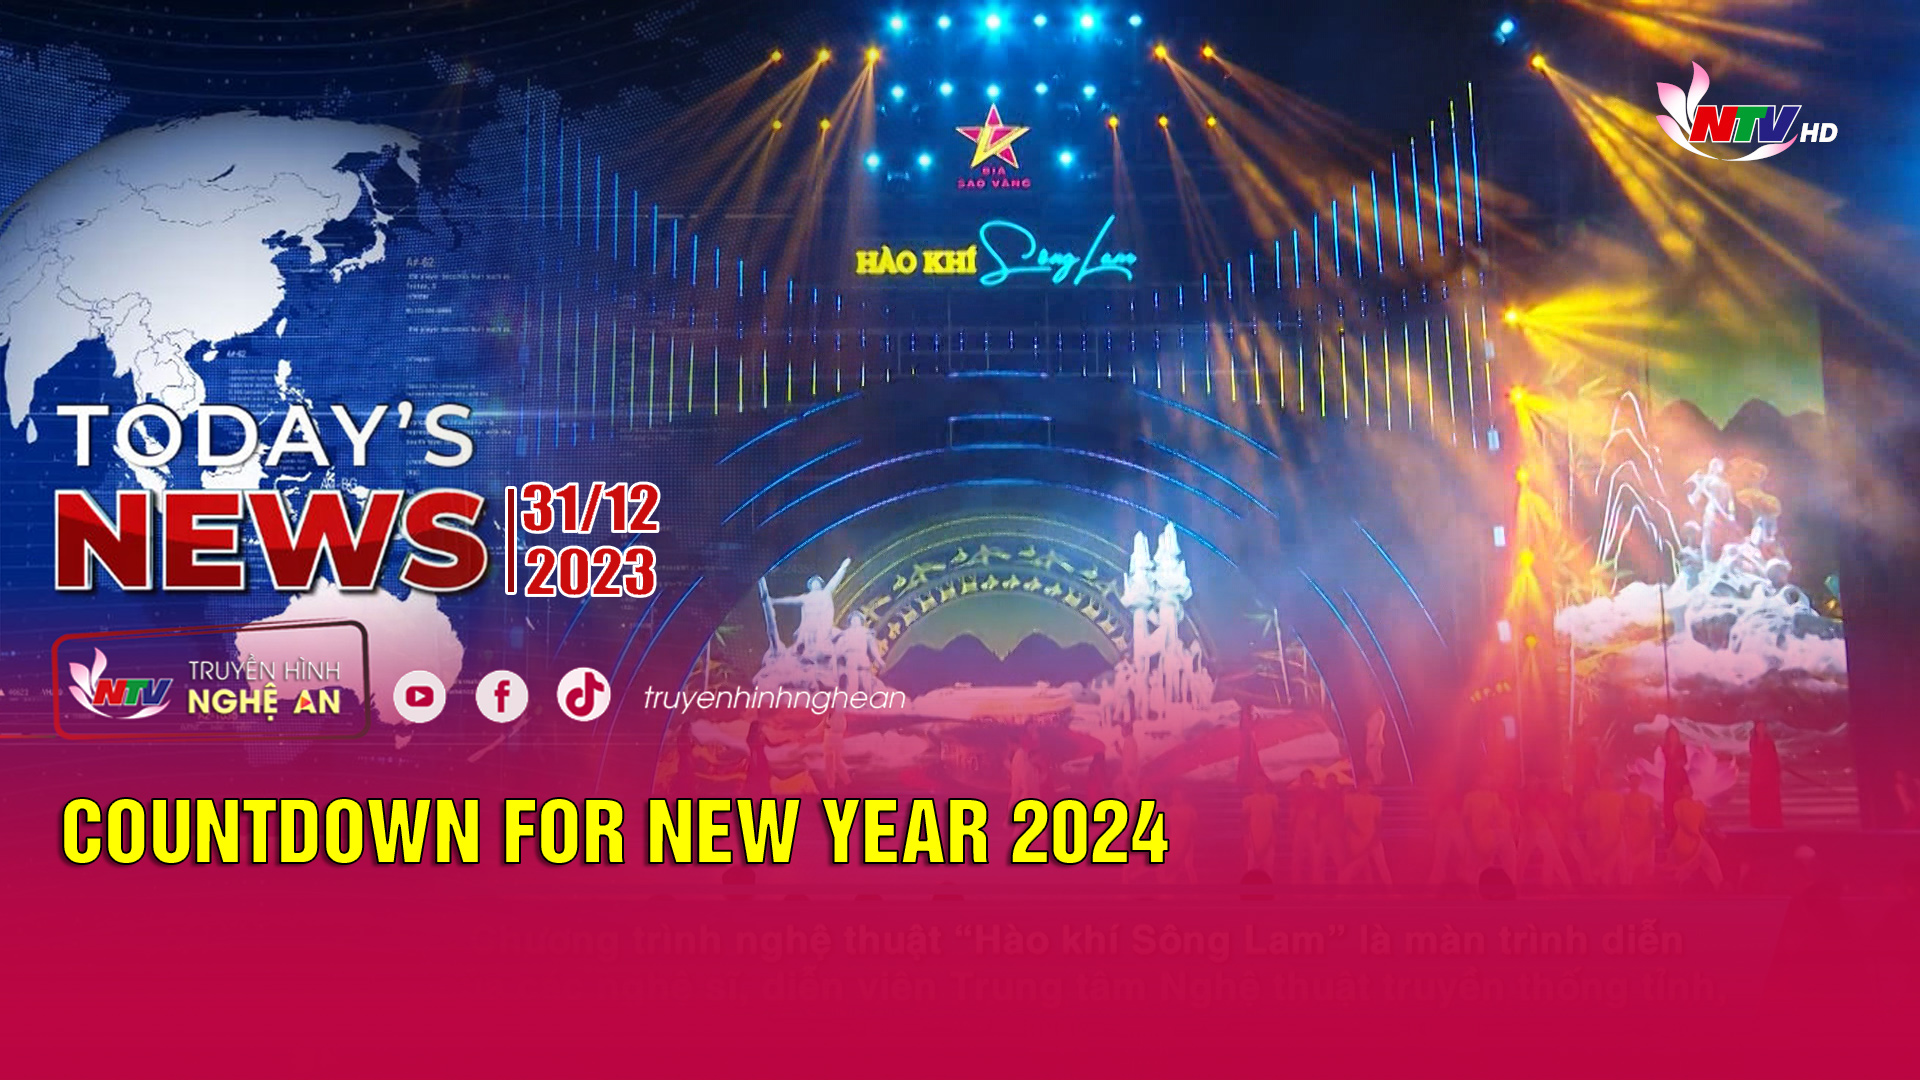 Today's News - 31/12/2023: Countdown for new year 2024